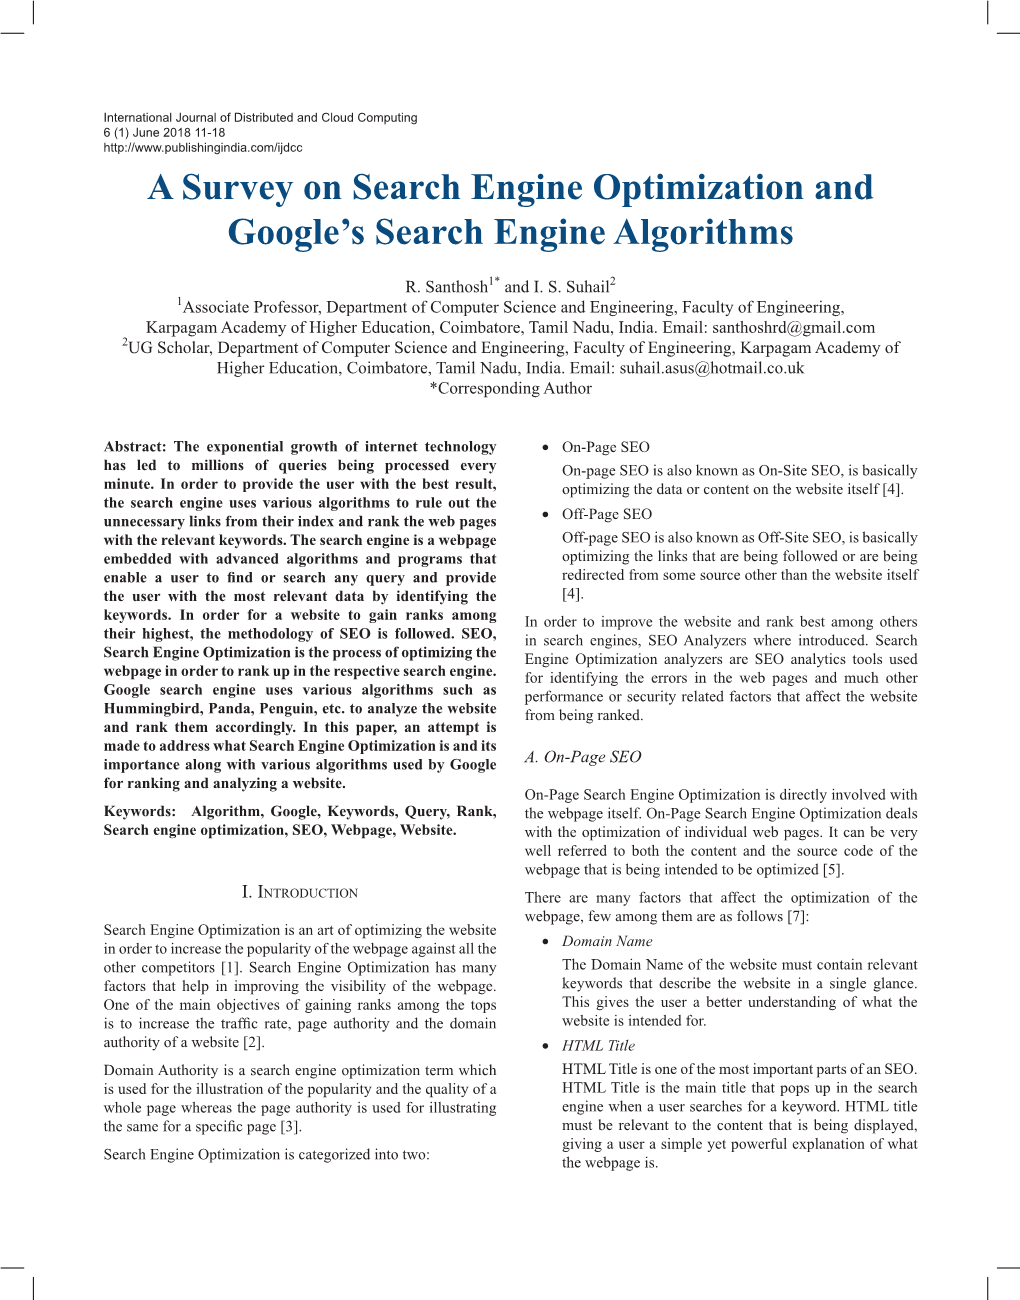 A Survey on Search Engine Optimization and Google's Search